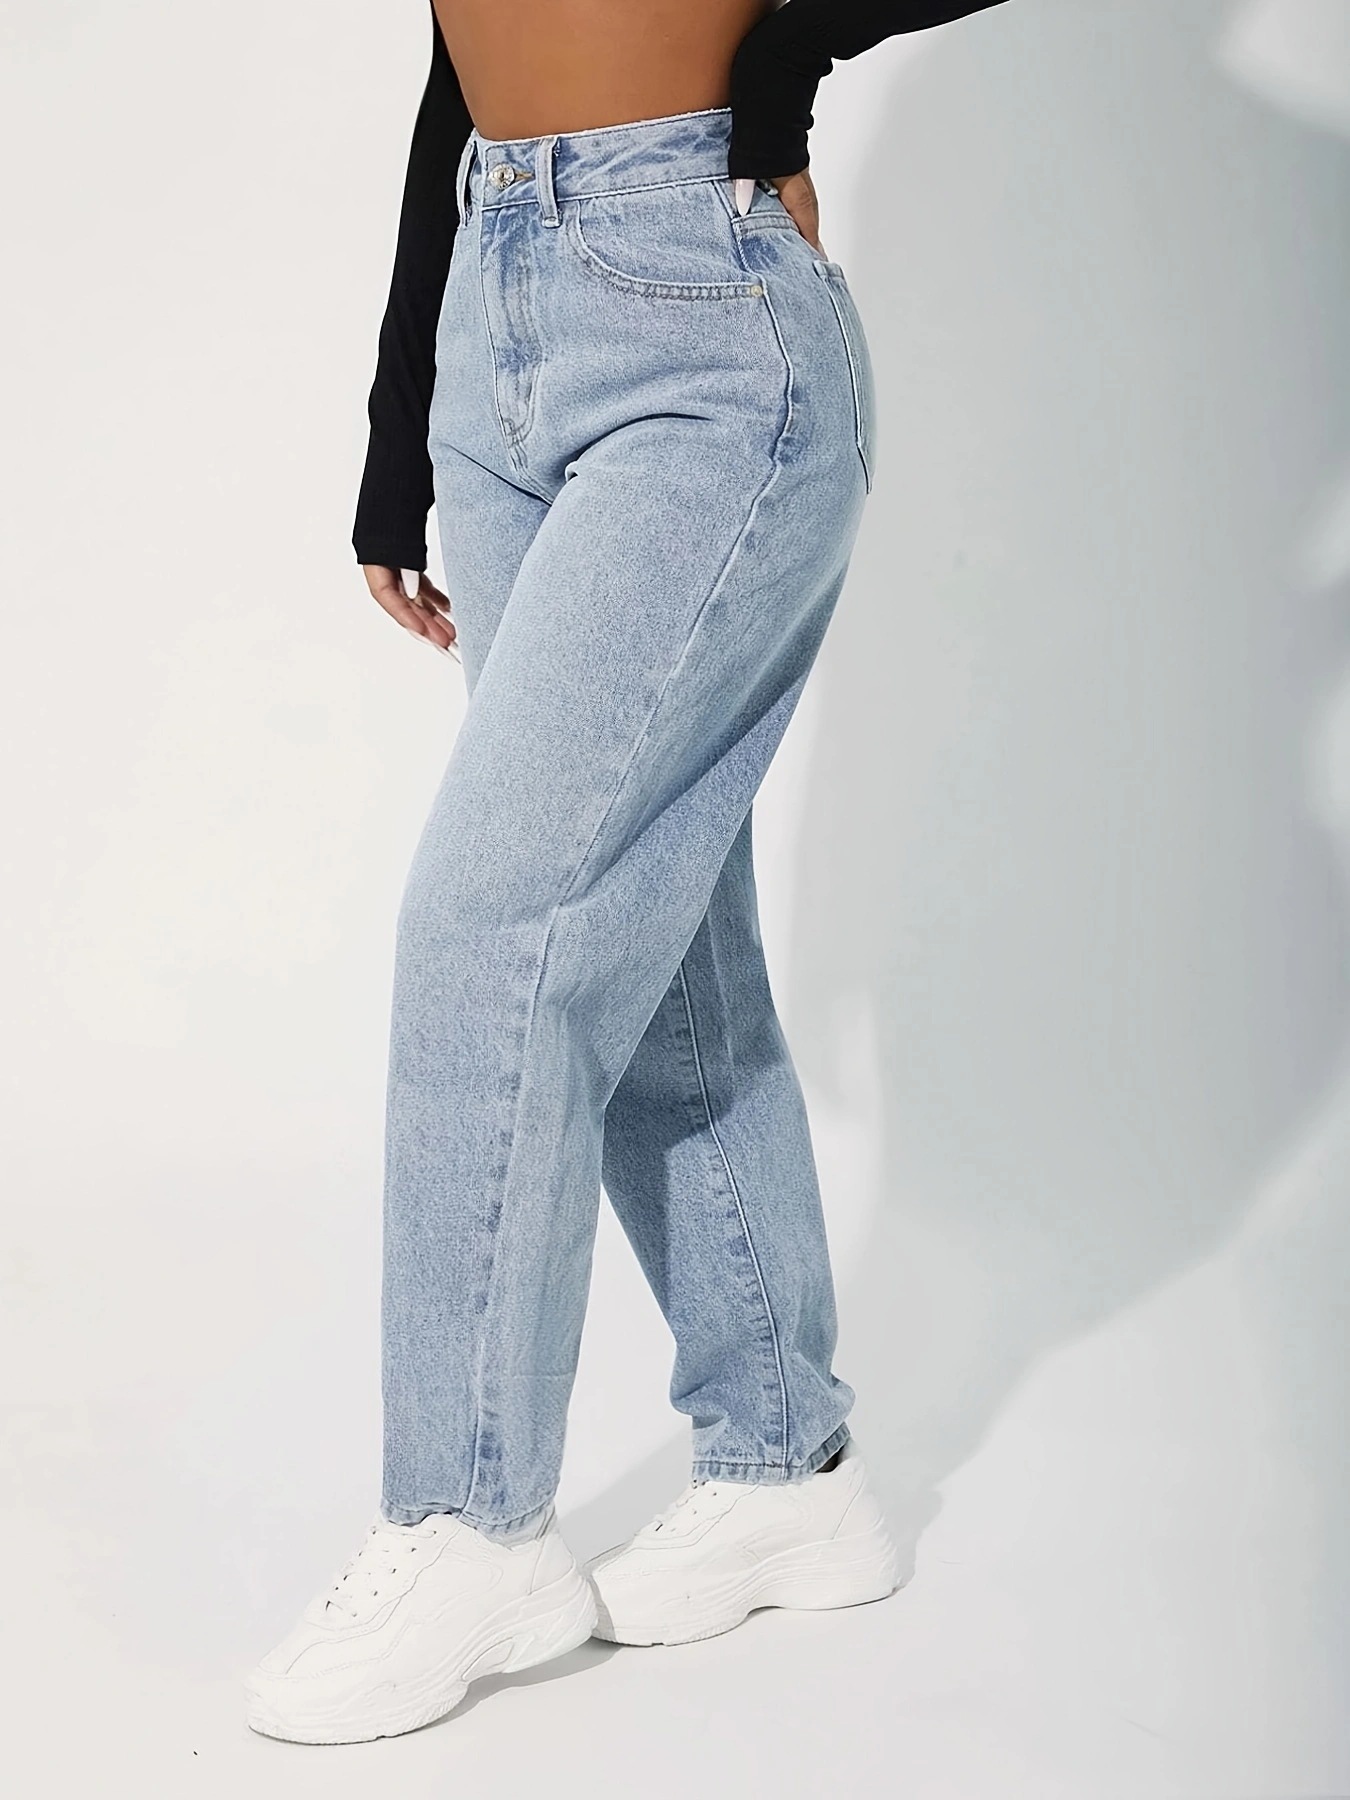 Pd08318# In Stock Wish Cross-Border EBay Amazon European and American Women's Clothing Fashion Trend Solid Color Denim Straight-Leg Pants